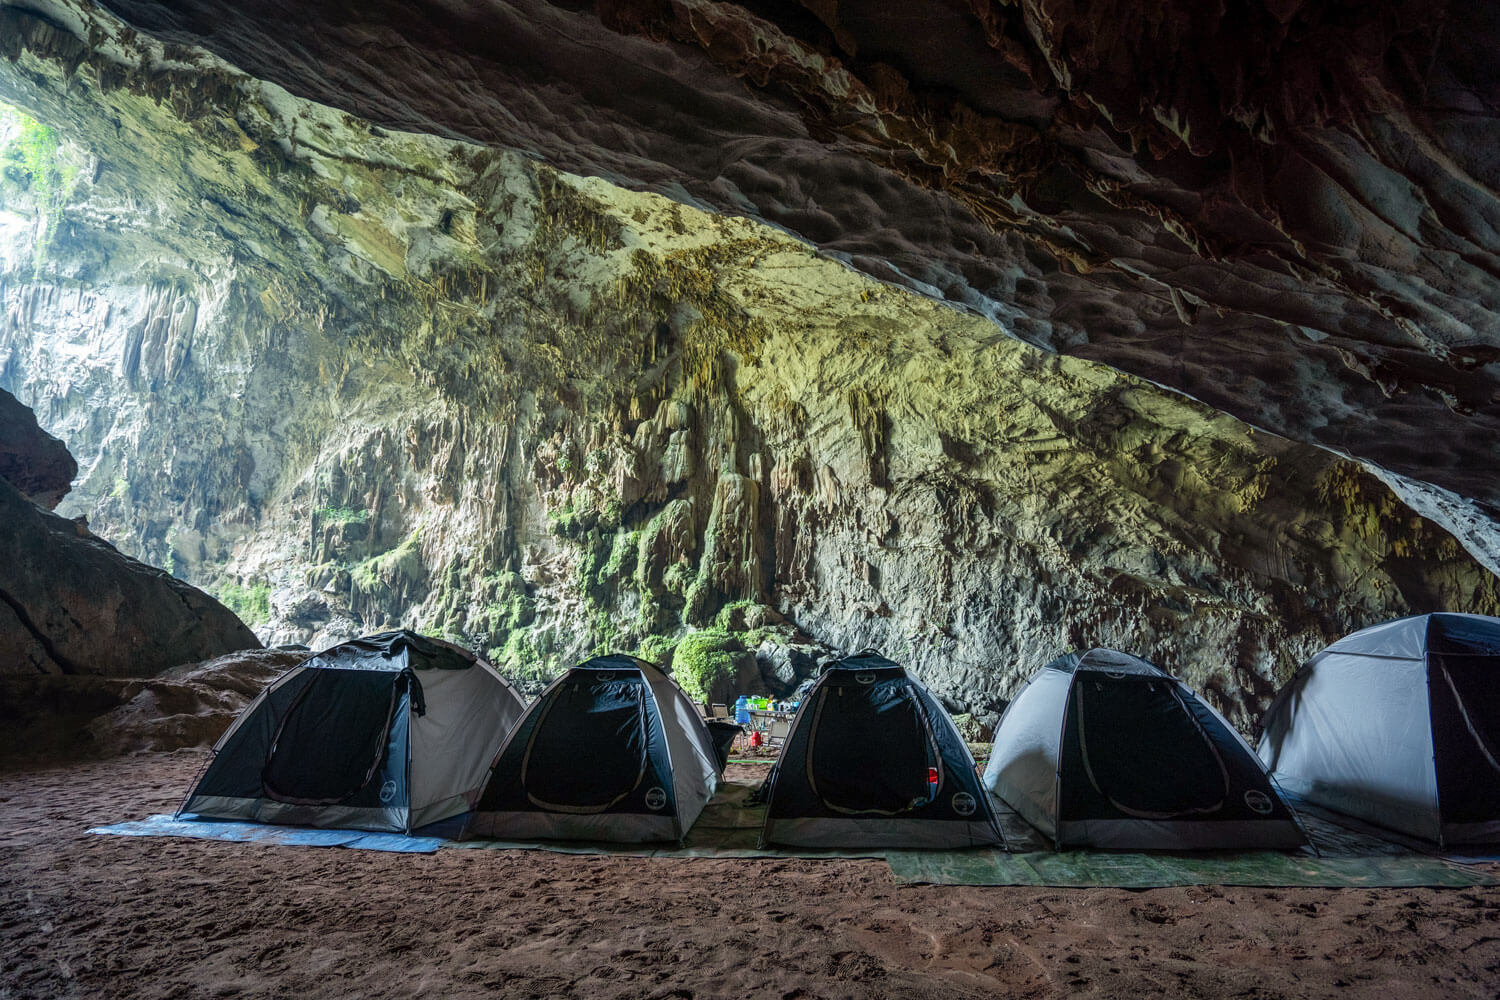 Camping gear is provided on Hang Ba deep jungle expedition tour.